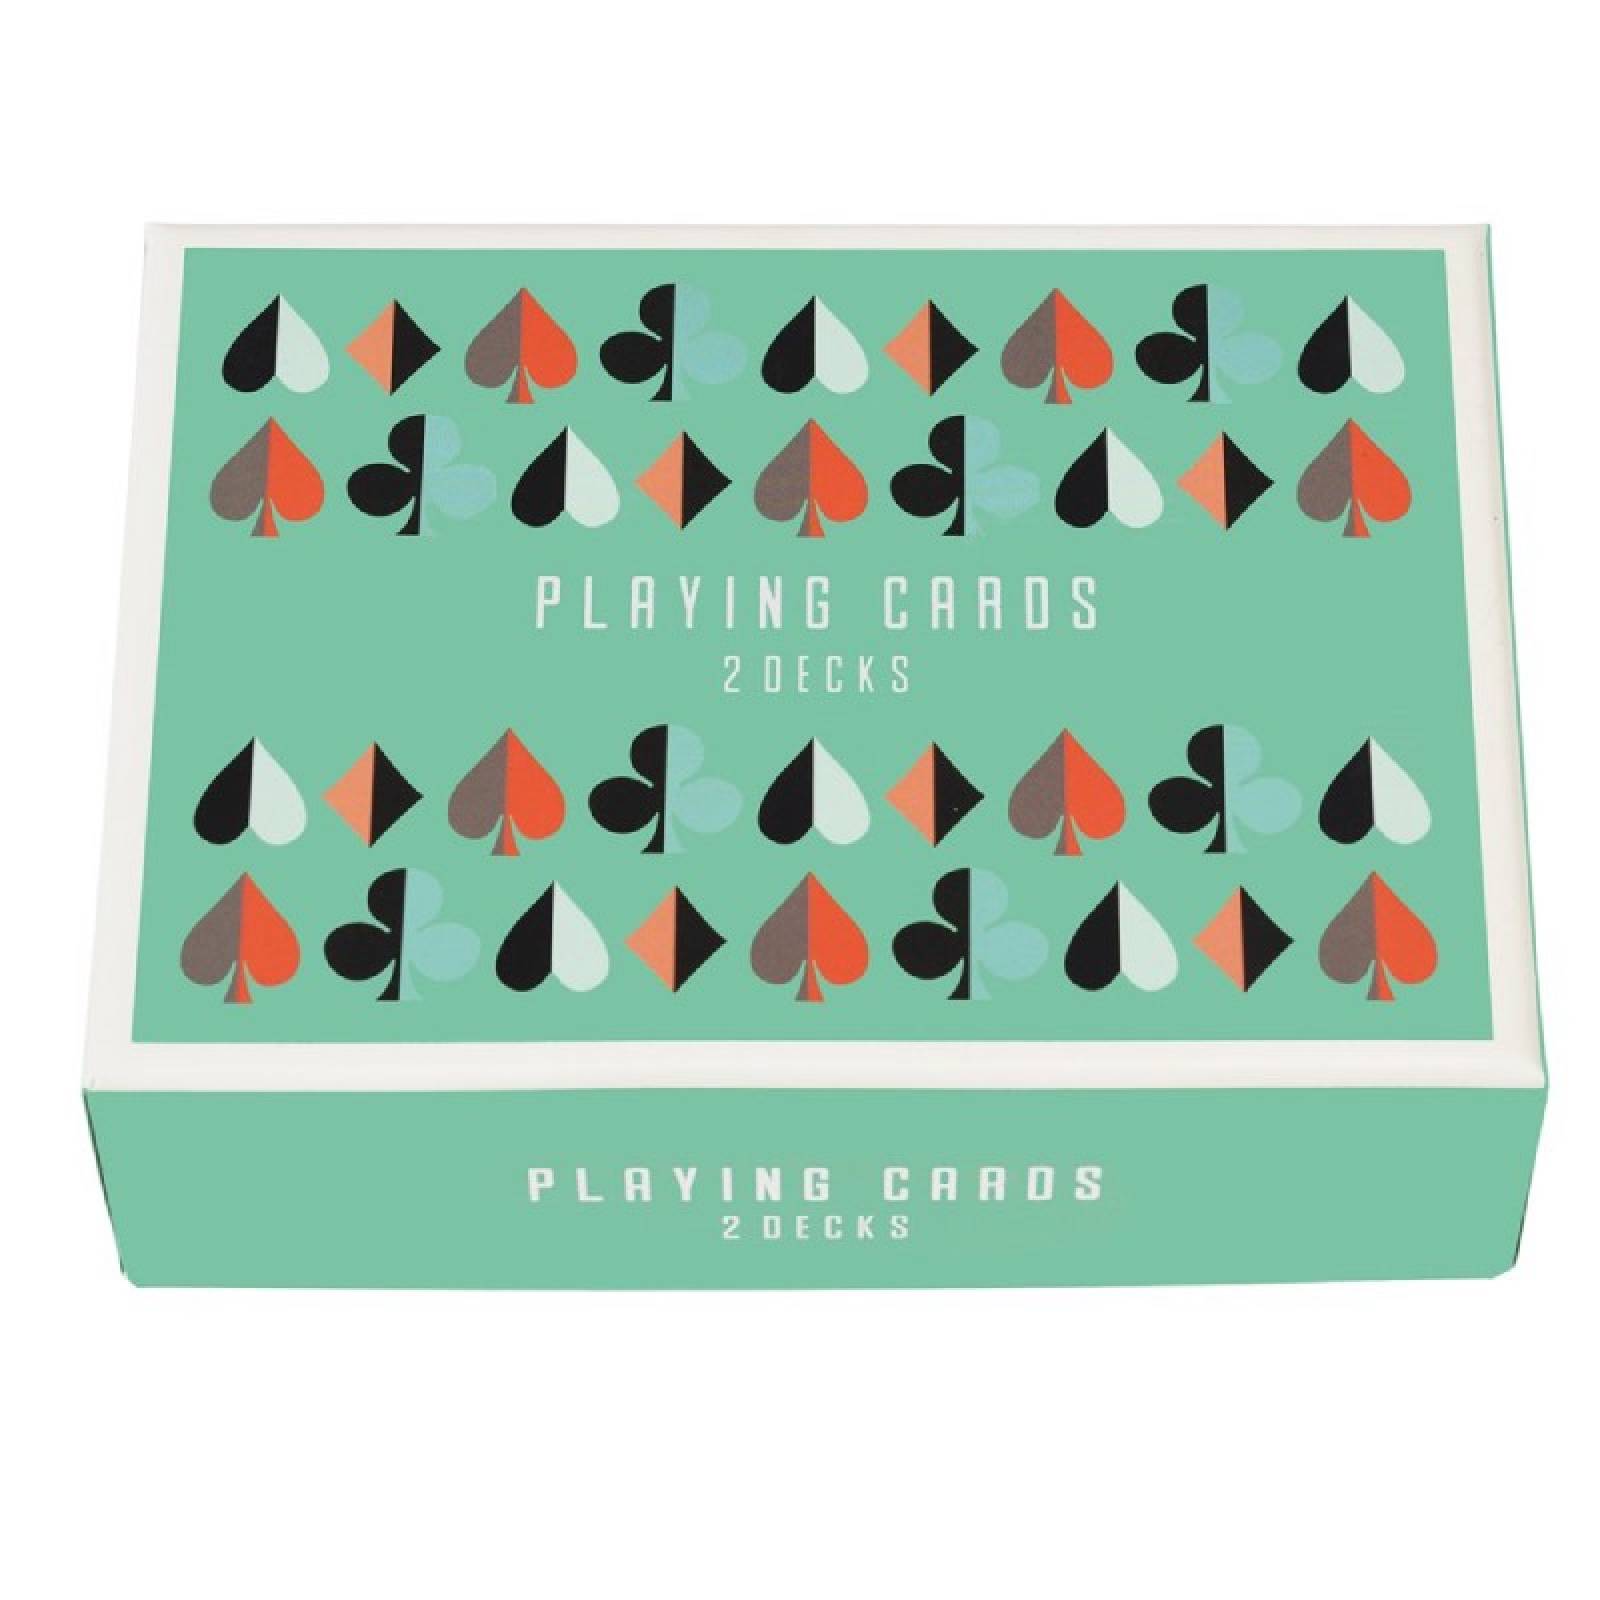 Box Of 2 Decks Of Playing Cards